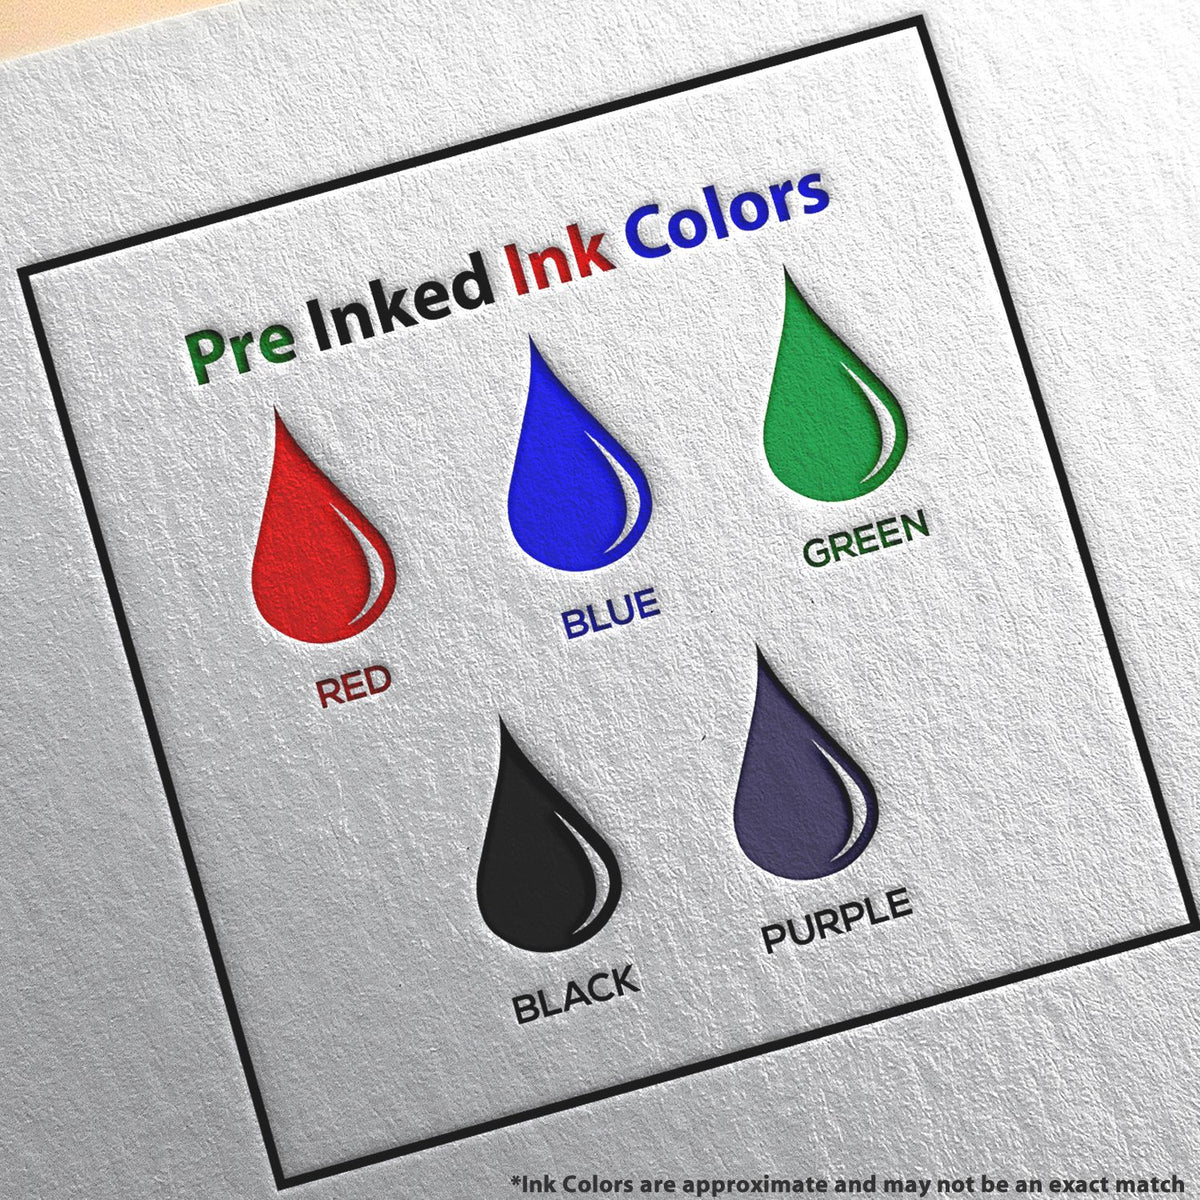 A picture showing the different ink colors or hues available for the Slim Pre-Inked New Mexico Architect Seal Stamp product.